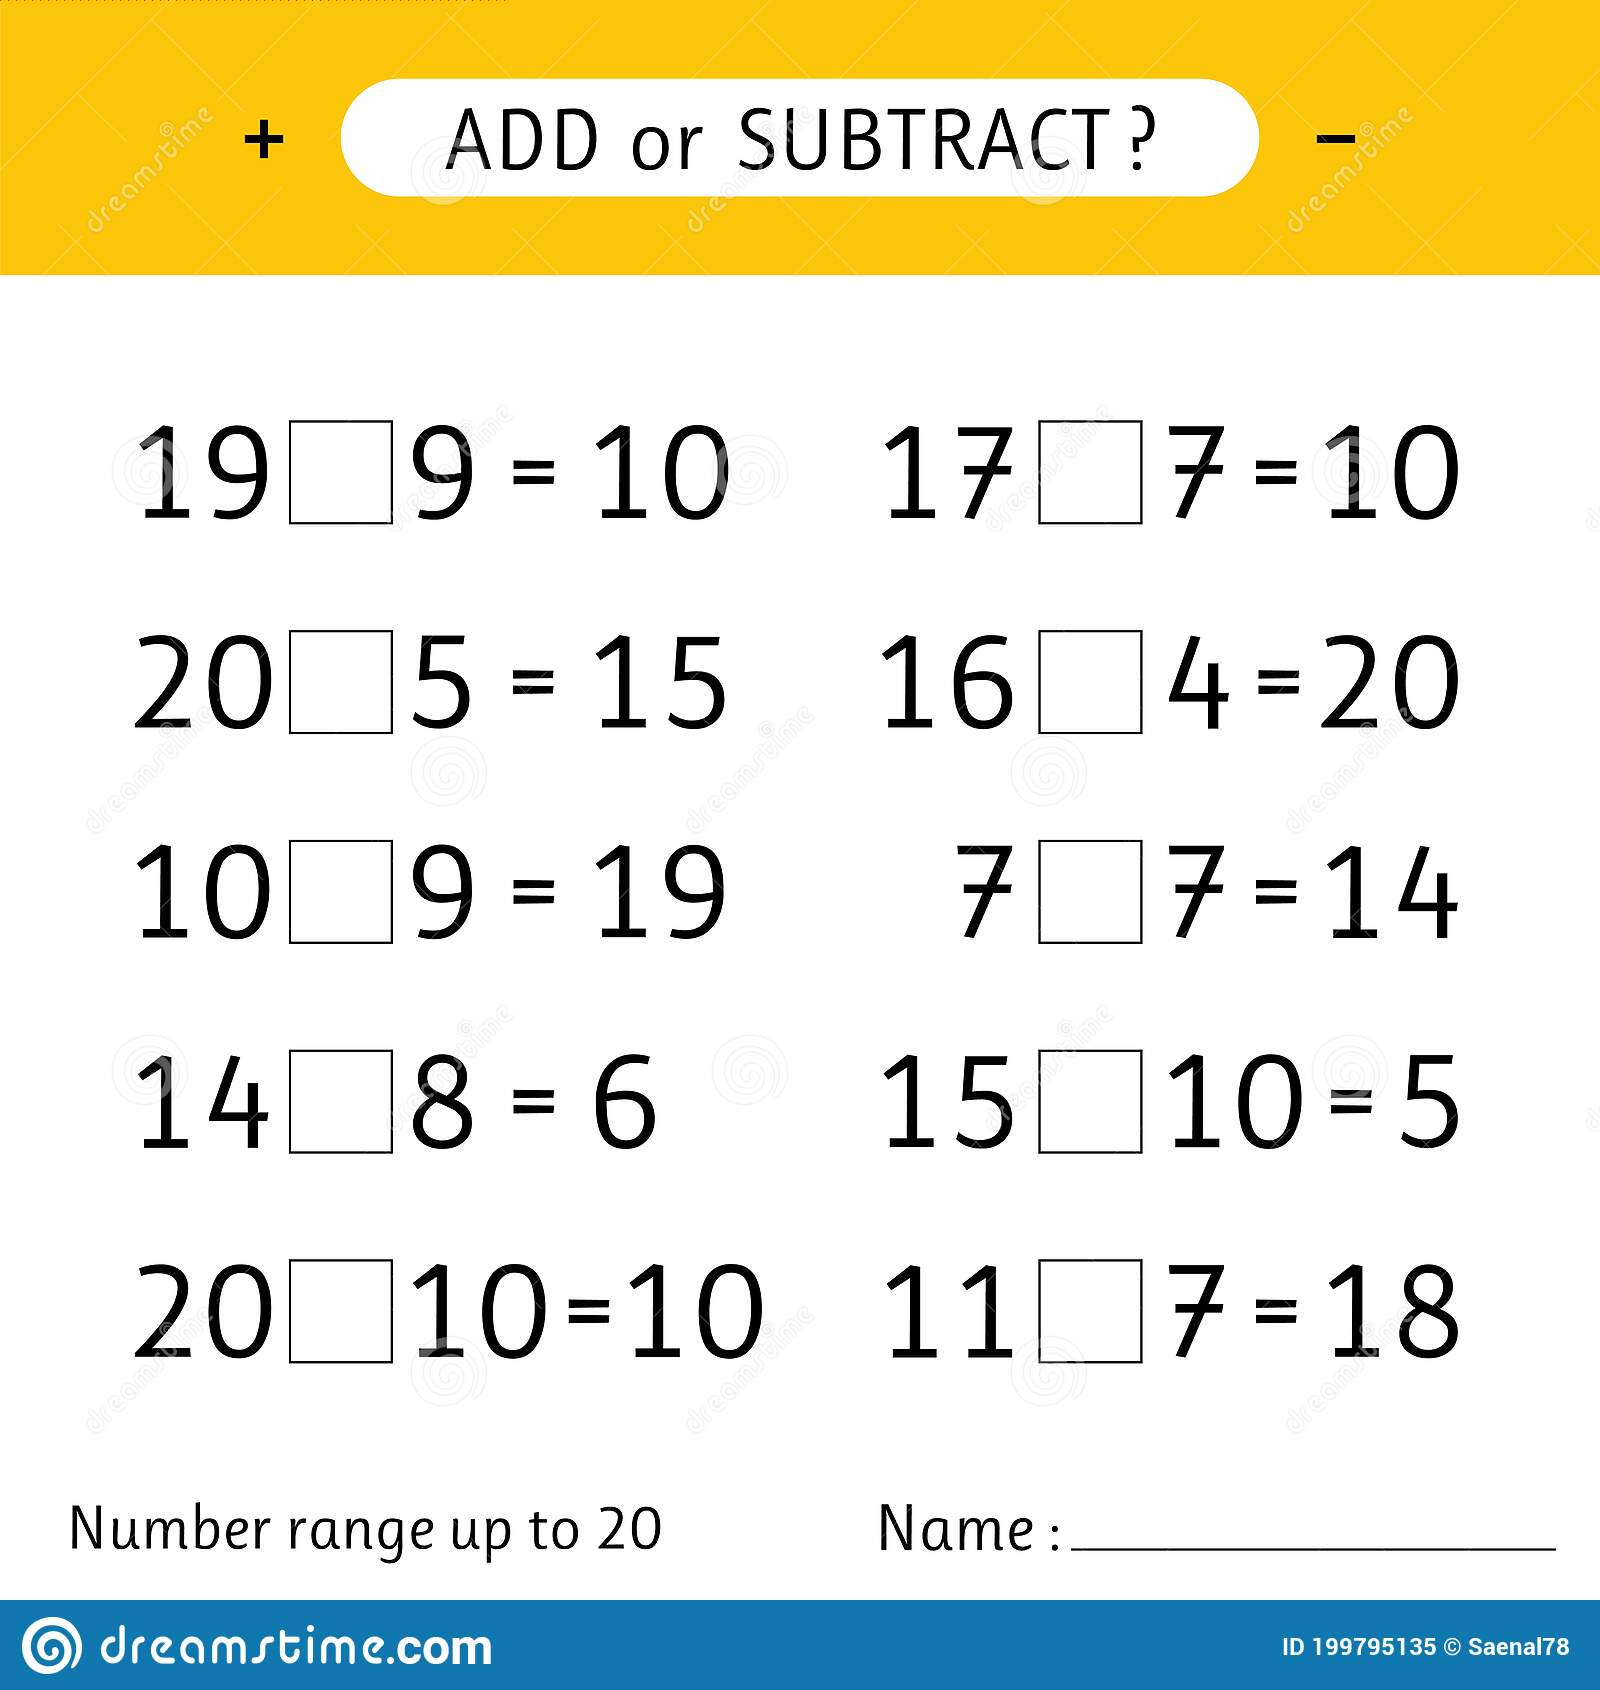 adding-and-subtracting-numbers-up-to-20-worksheets-2023-numbersworksheets